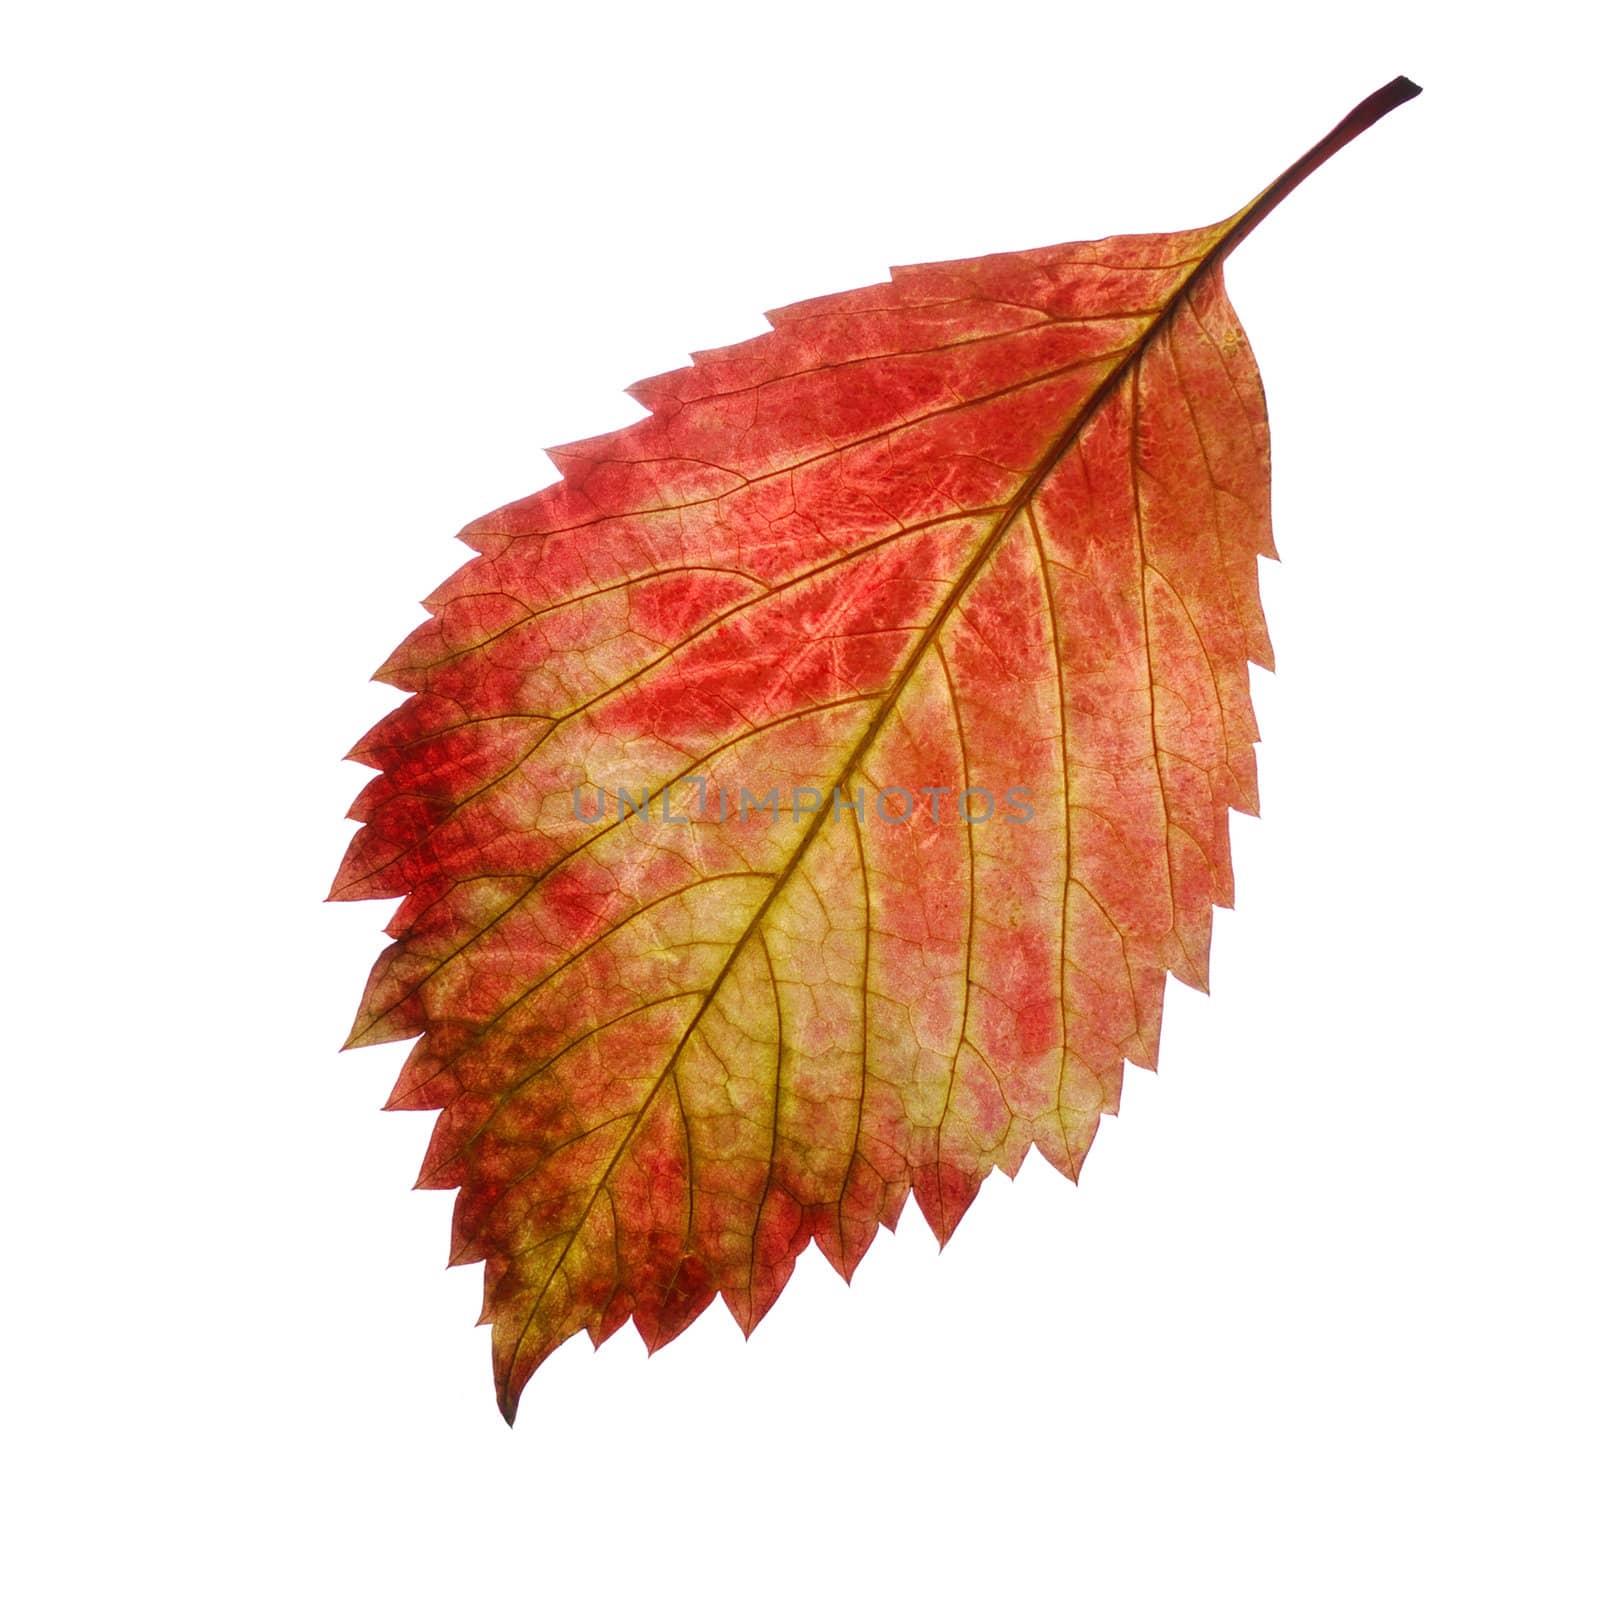 Red autumn leaf. It is isolated on a white background.